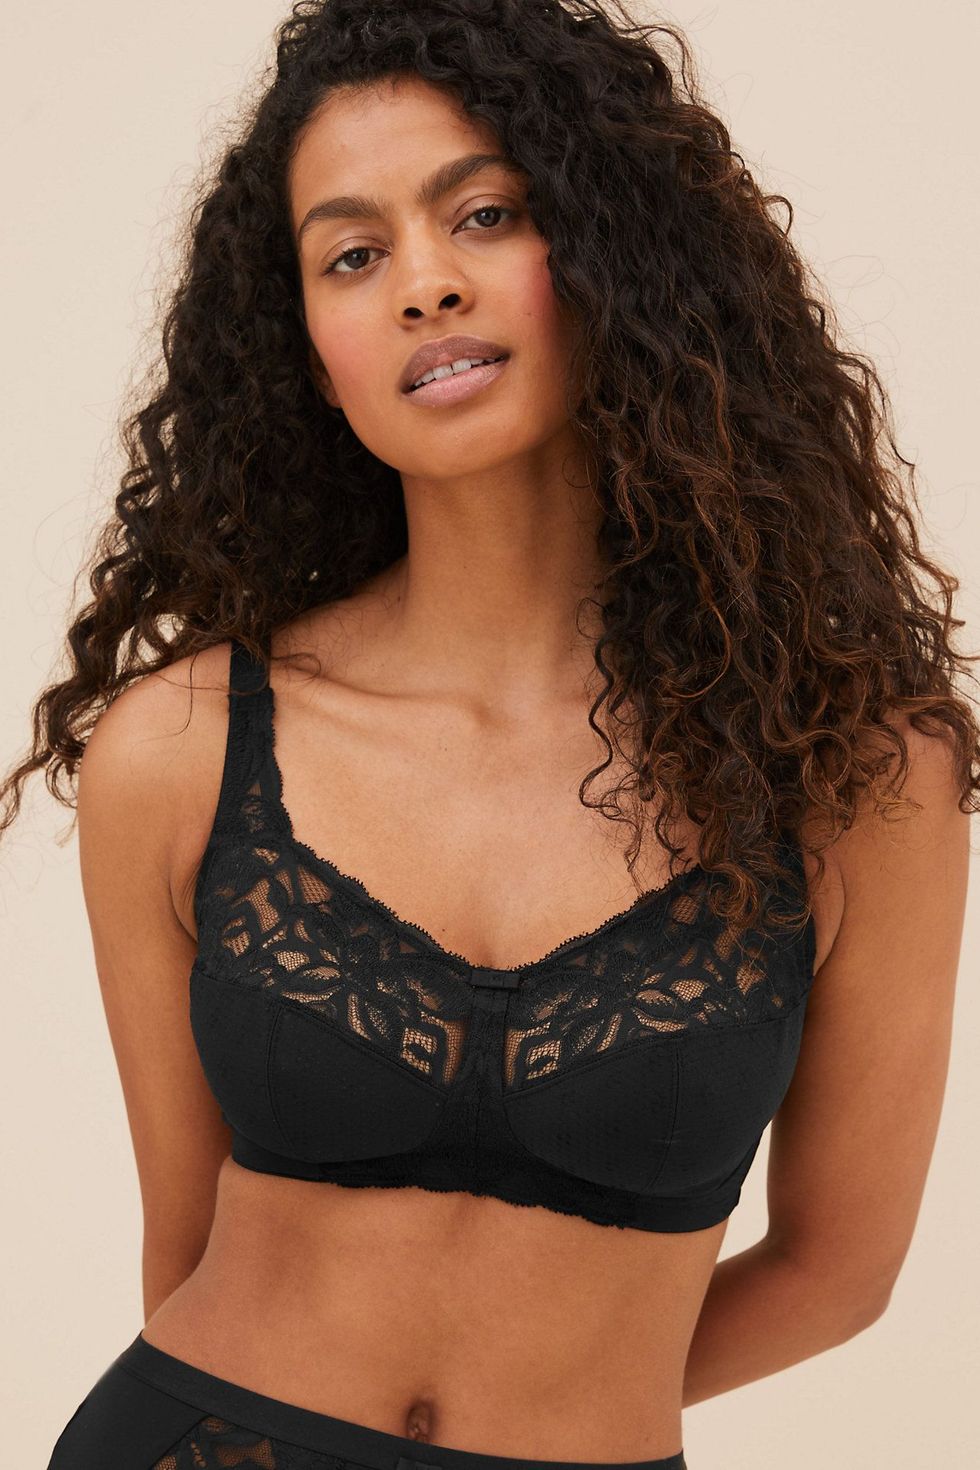 The 21 Best Marks and Spencer Bras to Shop Now